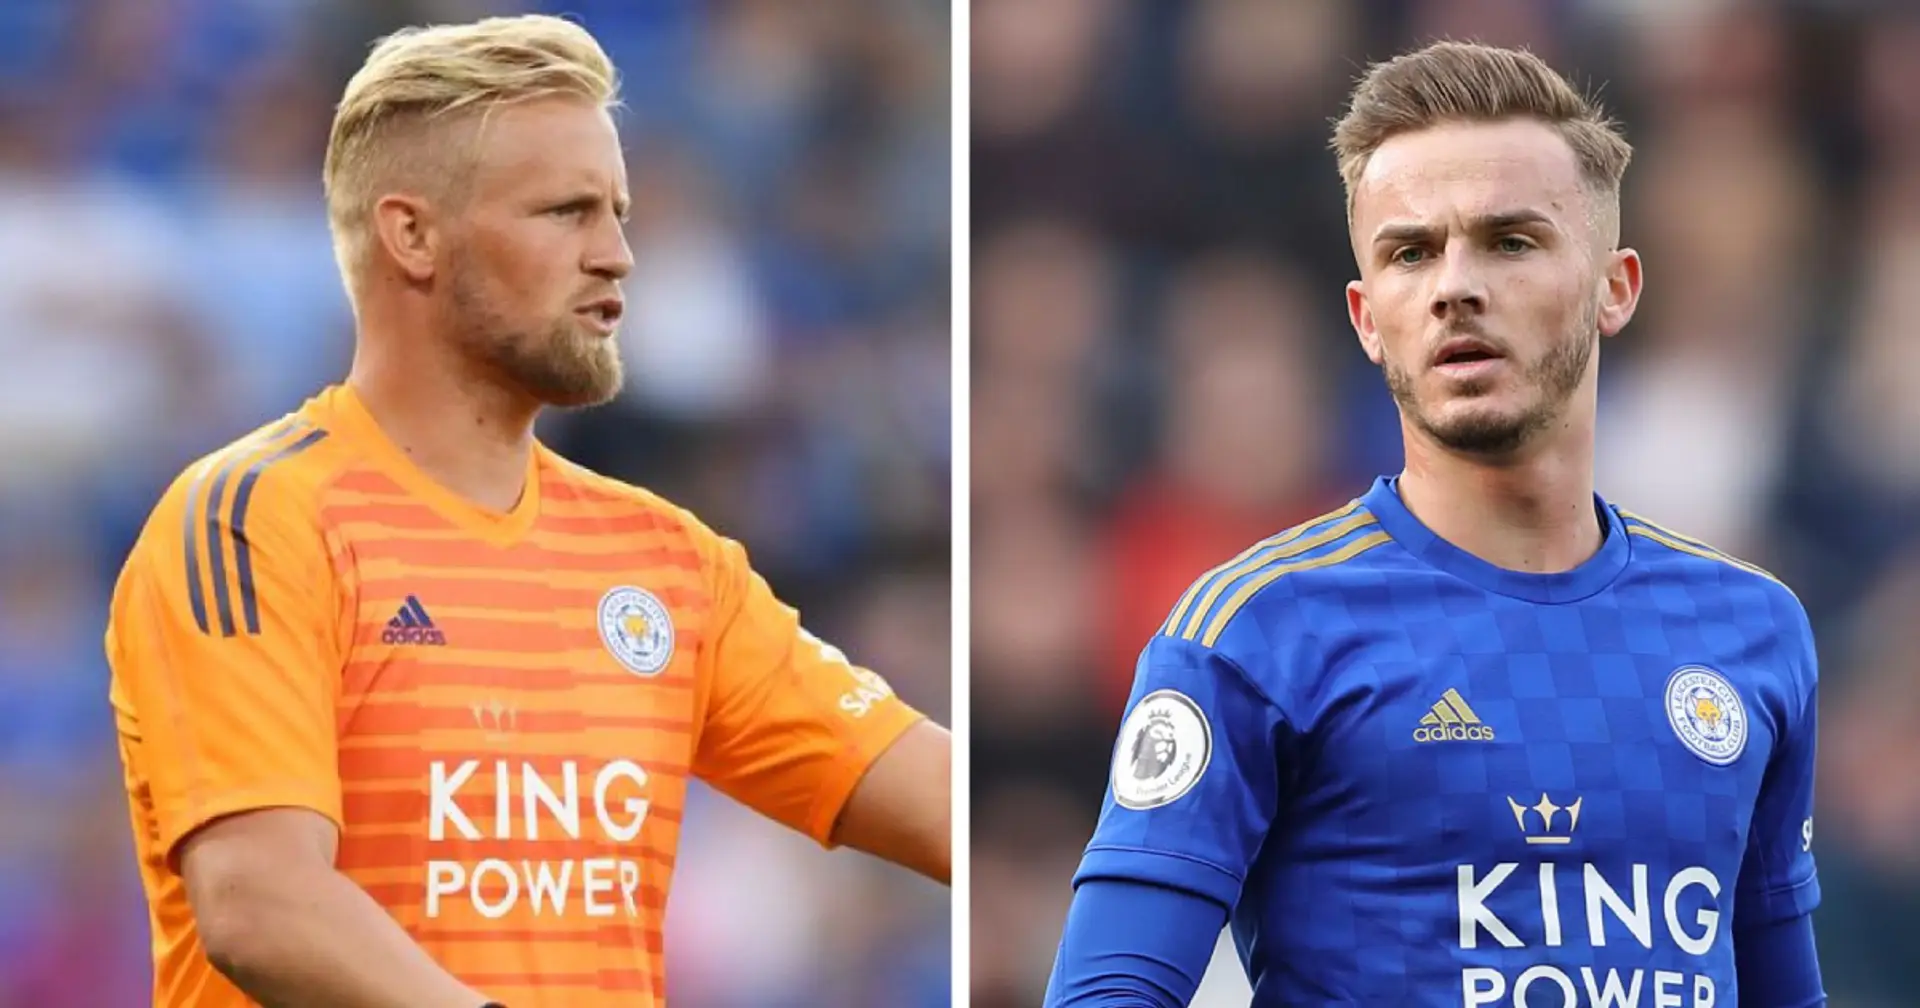 'Sometimes I worry for him': Kasper Schmeichel explains why Man United target James Maddison is dealing with extra pressure